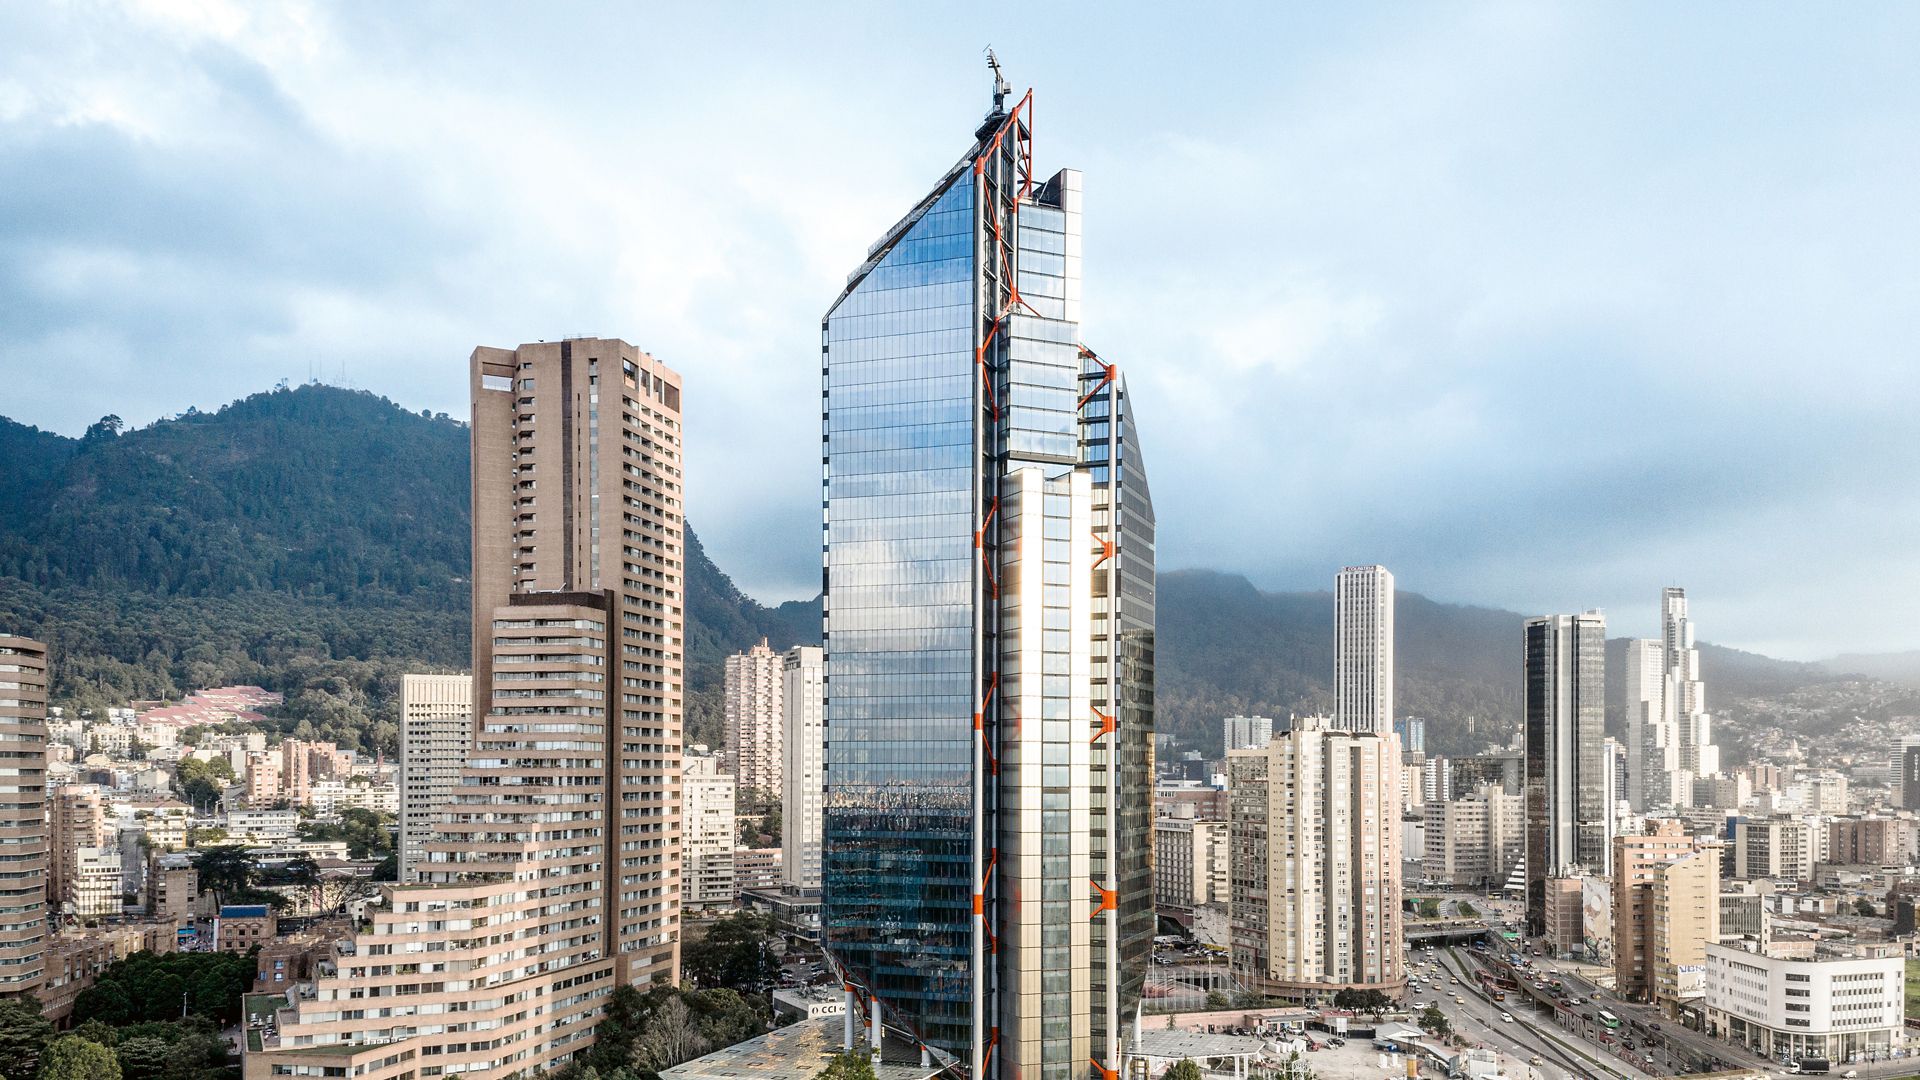 The ATRIO Towers, a two-tower development with spaces for offices, public services and shops, is located in Bogota, Colombia